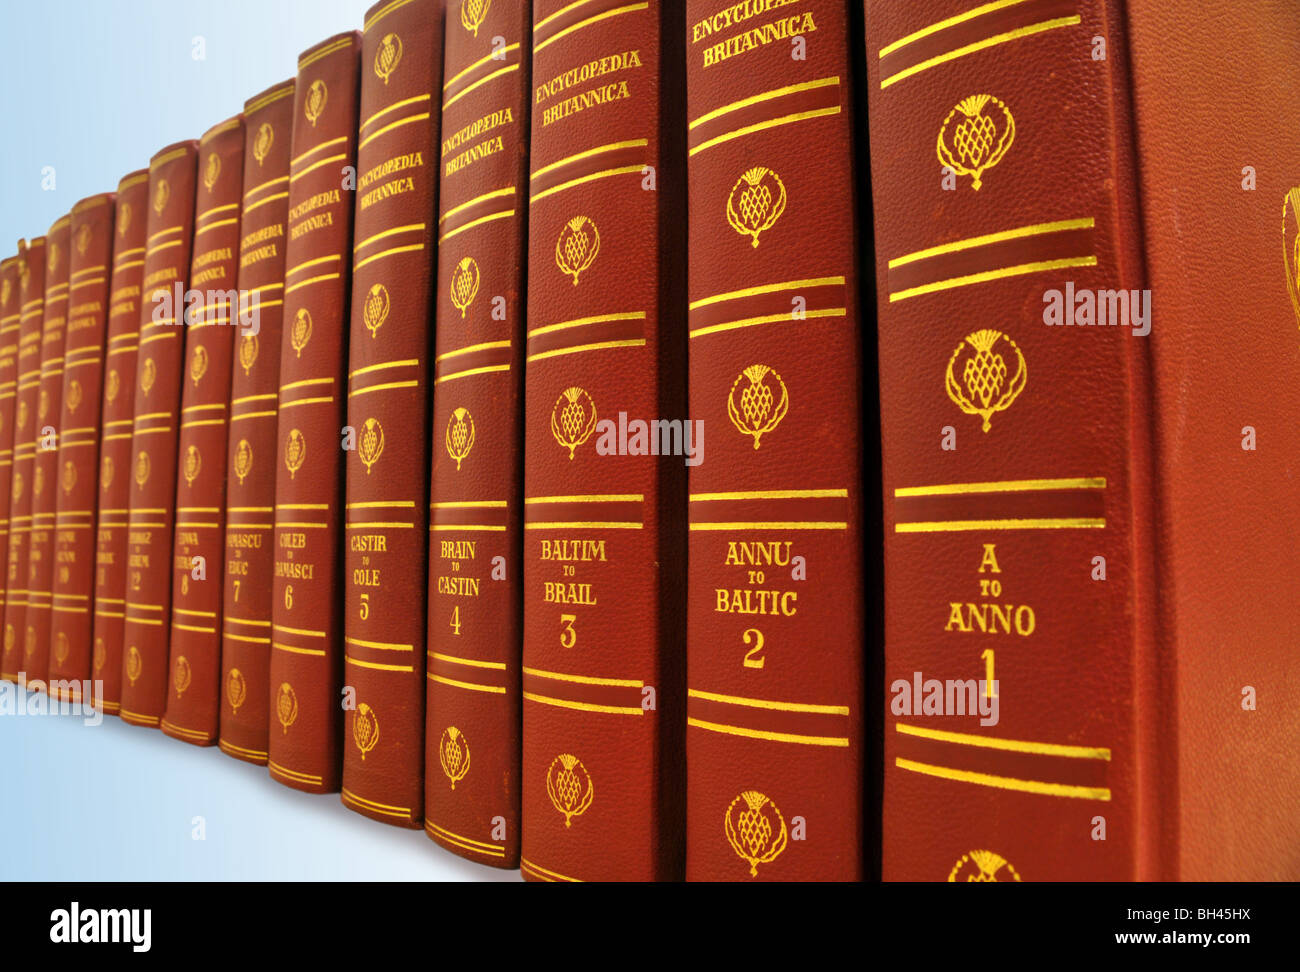 A row of books of the encyclopedia Britannica. Stock Photo